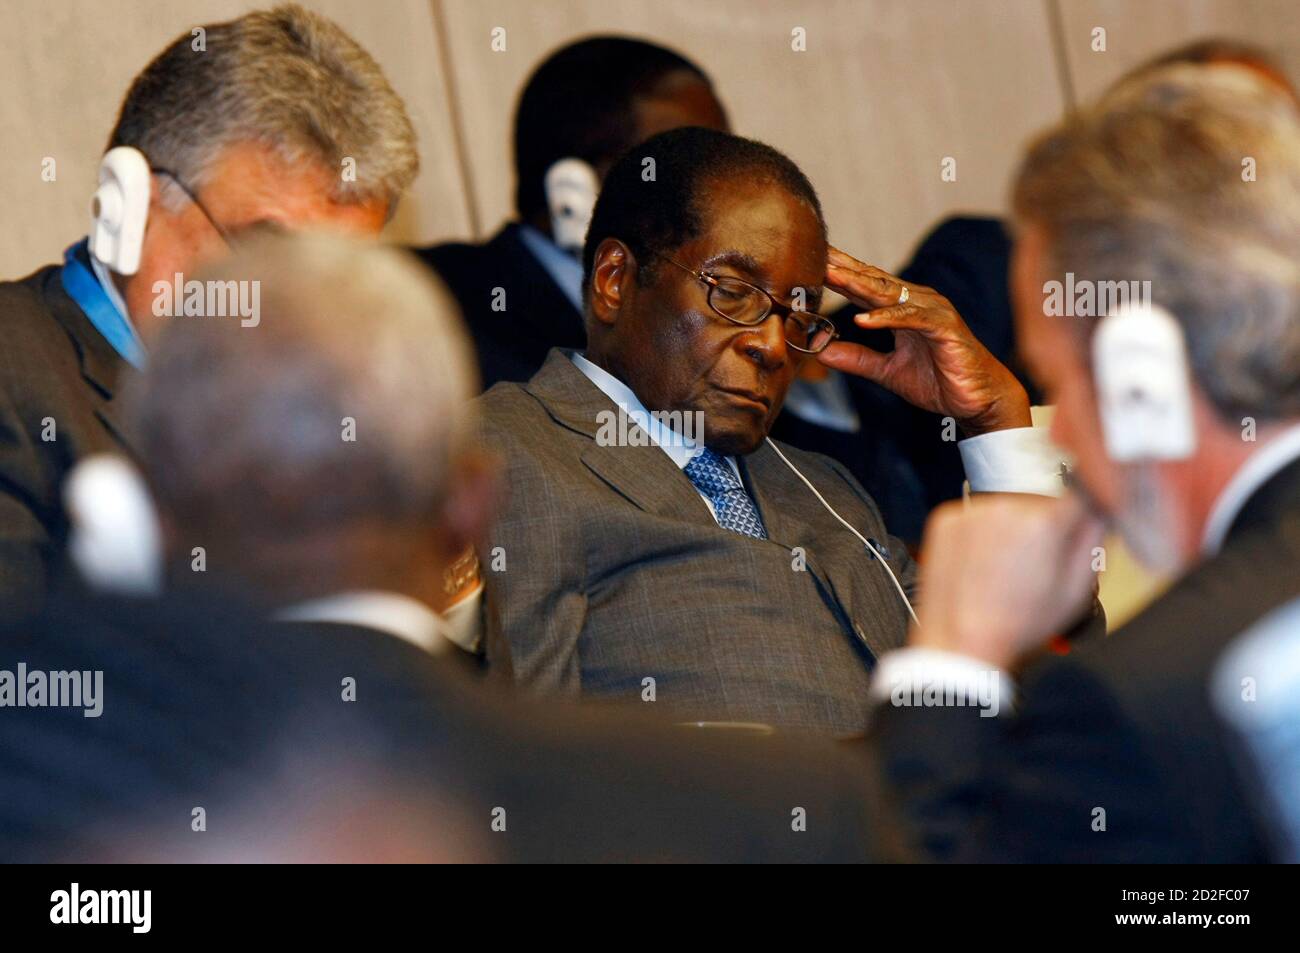 Zimbabwe's President Robert Mugabe (C) attends a food summit of Latin American and African heads of state in Rome November 15, 2009. World leaders and government officials will meet in Rome on Monday for a three-day U.N. World Food Summit on Food Security. REUTERS/Alessandro Bianchi   (ITALY POLITICS FOOD IMAGES OF THE DAY) Stock Photo